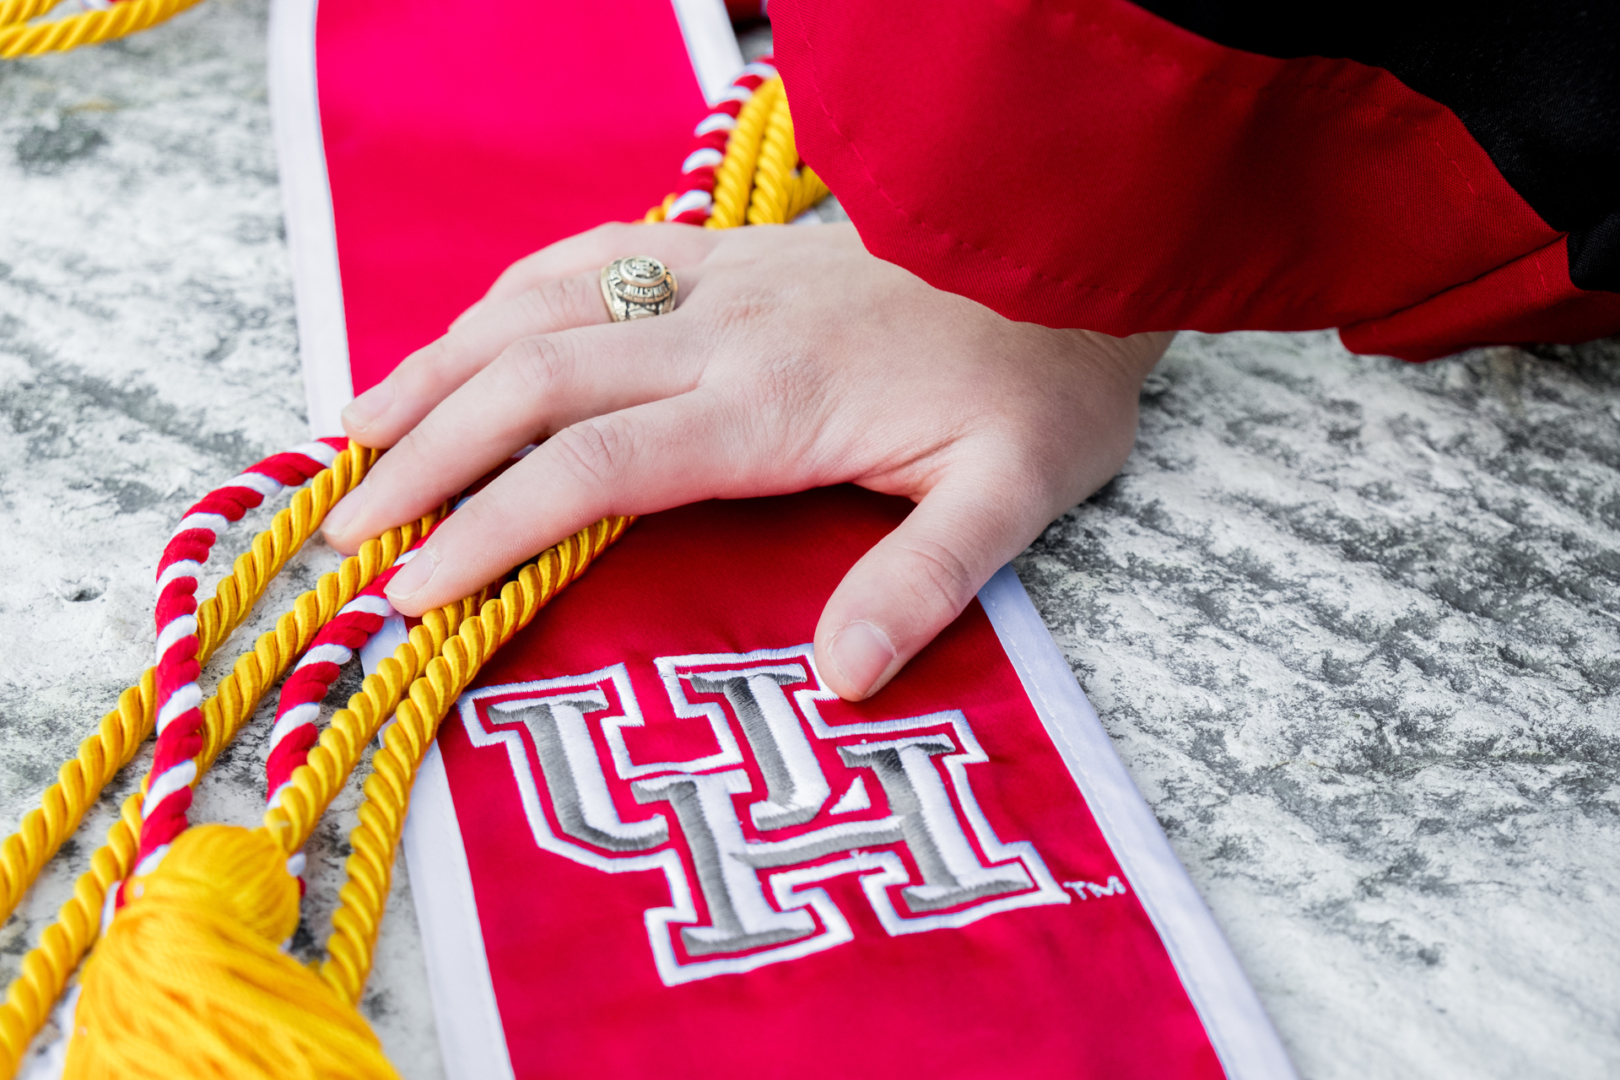 Each semester, class rings are presented to over 500 students while their friends and family look on. Class rings have been a University tradition since 1946 and are just one way students can remain connected to the University after graduating. | Kathryn Lenihan/The Cougar